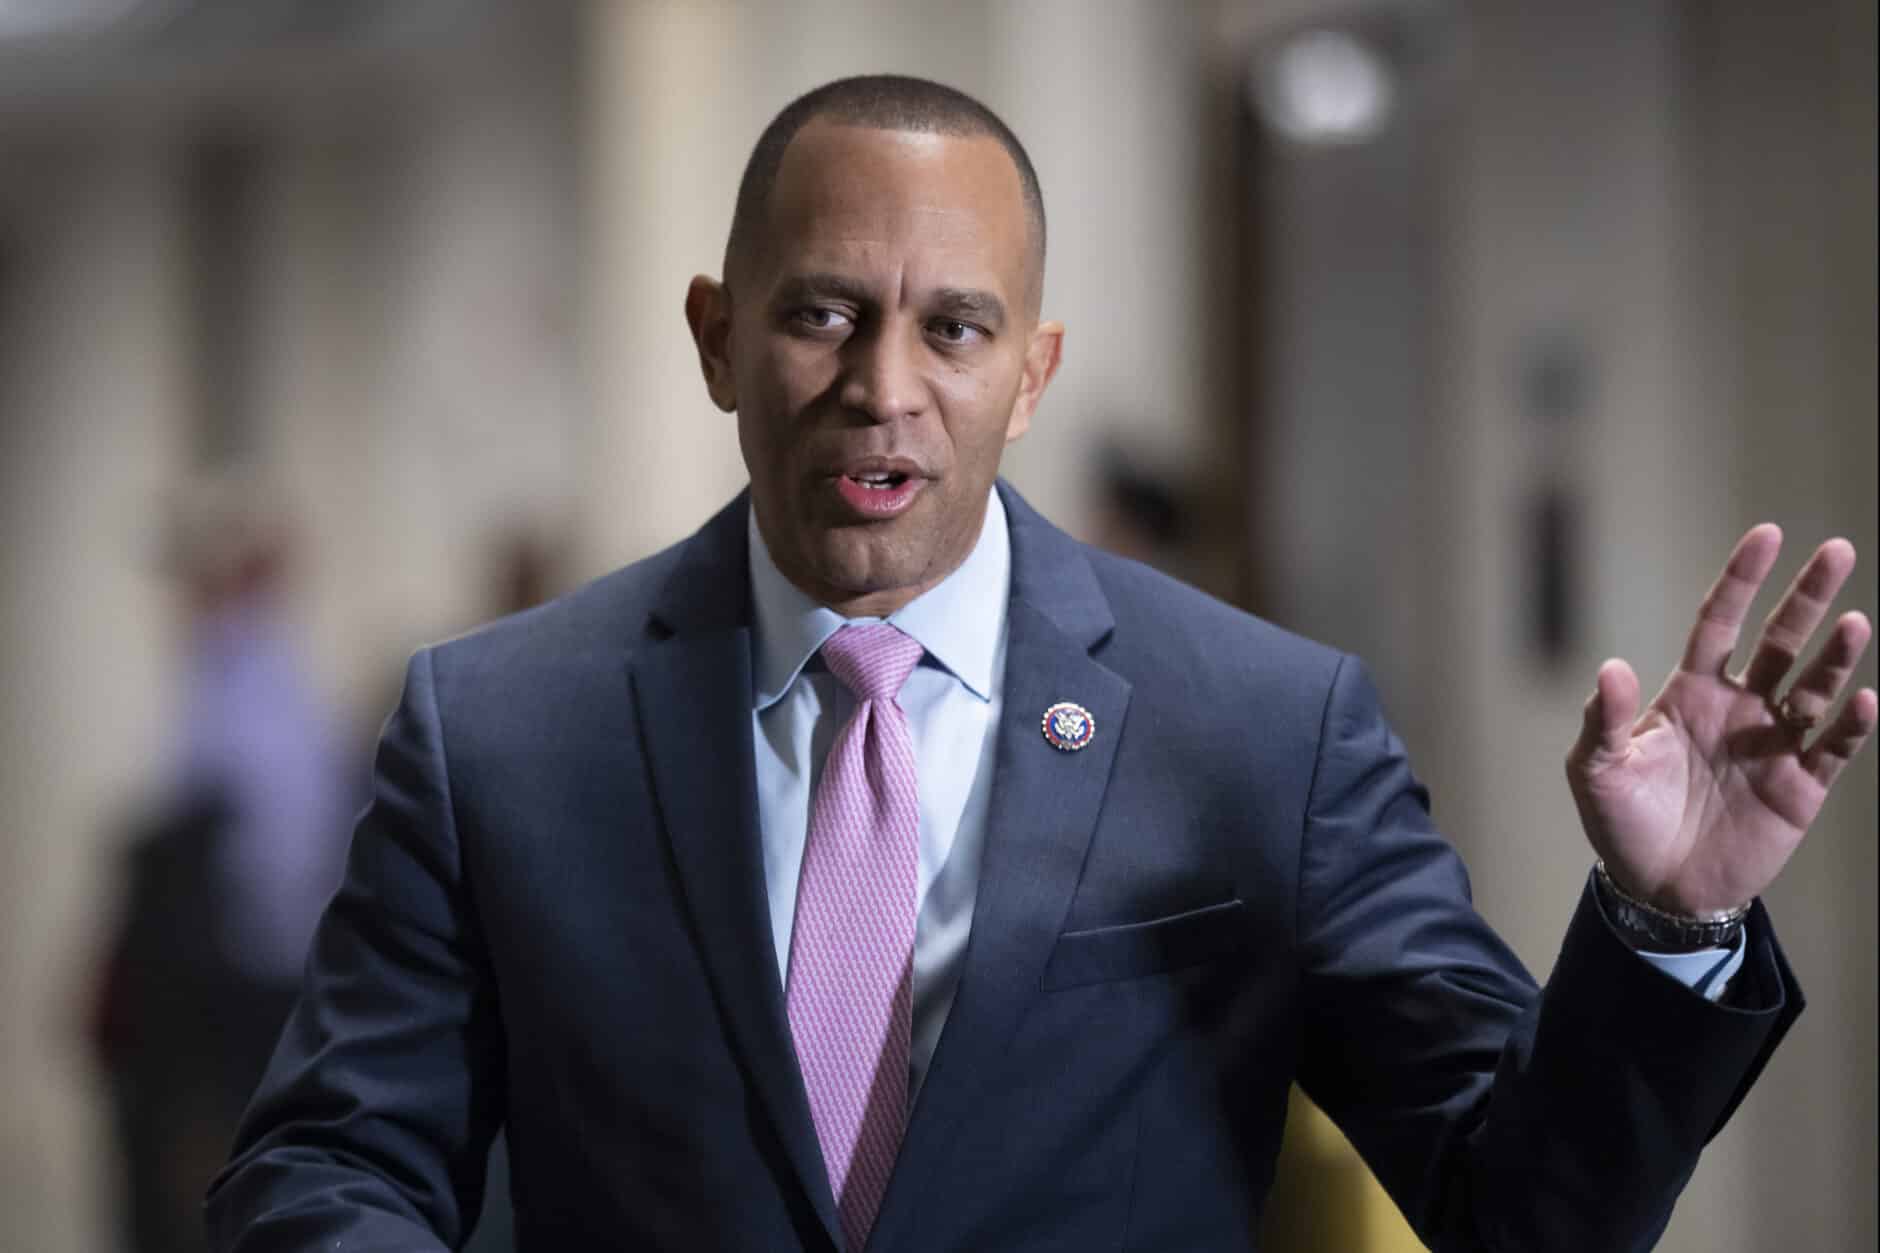 Hakeem Jeffries, 53, New York Rep, Claims Americans Suffer From Republicans 'Performative Politics'